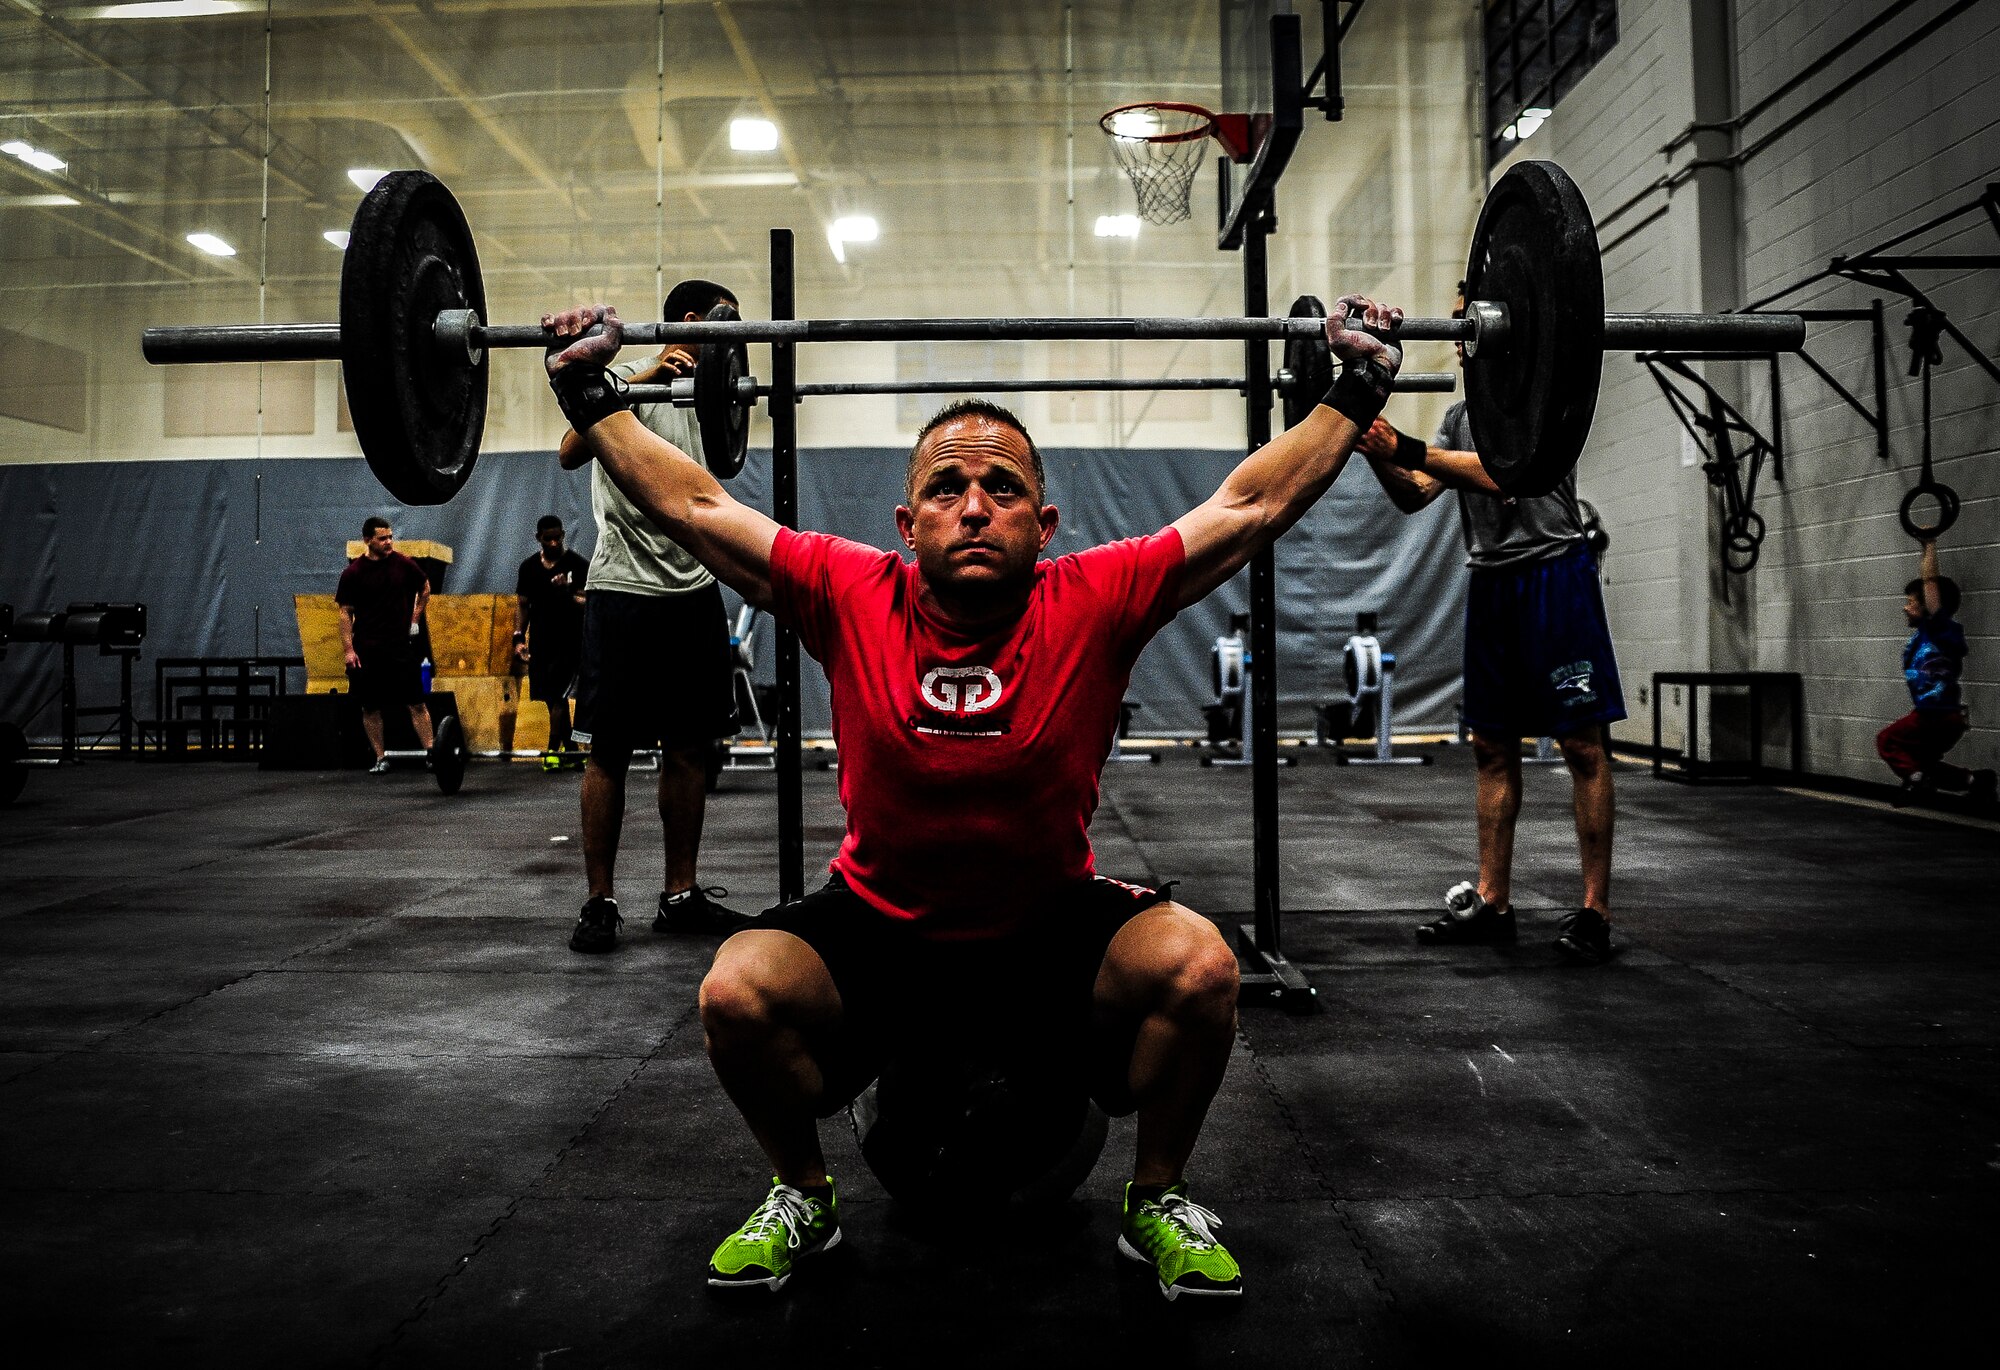 Chief Master Sgt. John Storms, 628th Security Forces Squadron superintendent, performs a power clean during a CrossFit class Nov. 19, 2012, at the Joint Base Charleston – Air Base Fitness Center. The CrossFit classes can accommodate individuals with different strength abilities and experience and there is always someone on hand to assist with proper form and technique. (U.S. Air Force photo/ Senior Airman Dennis Sloan)